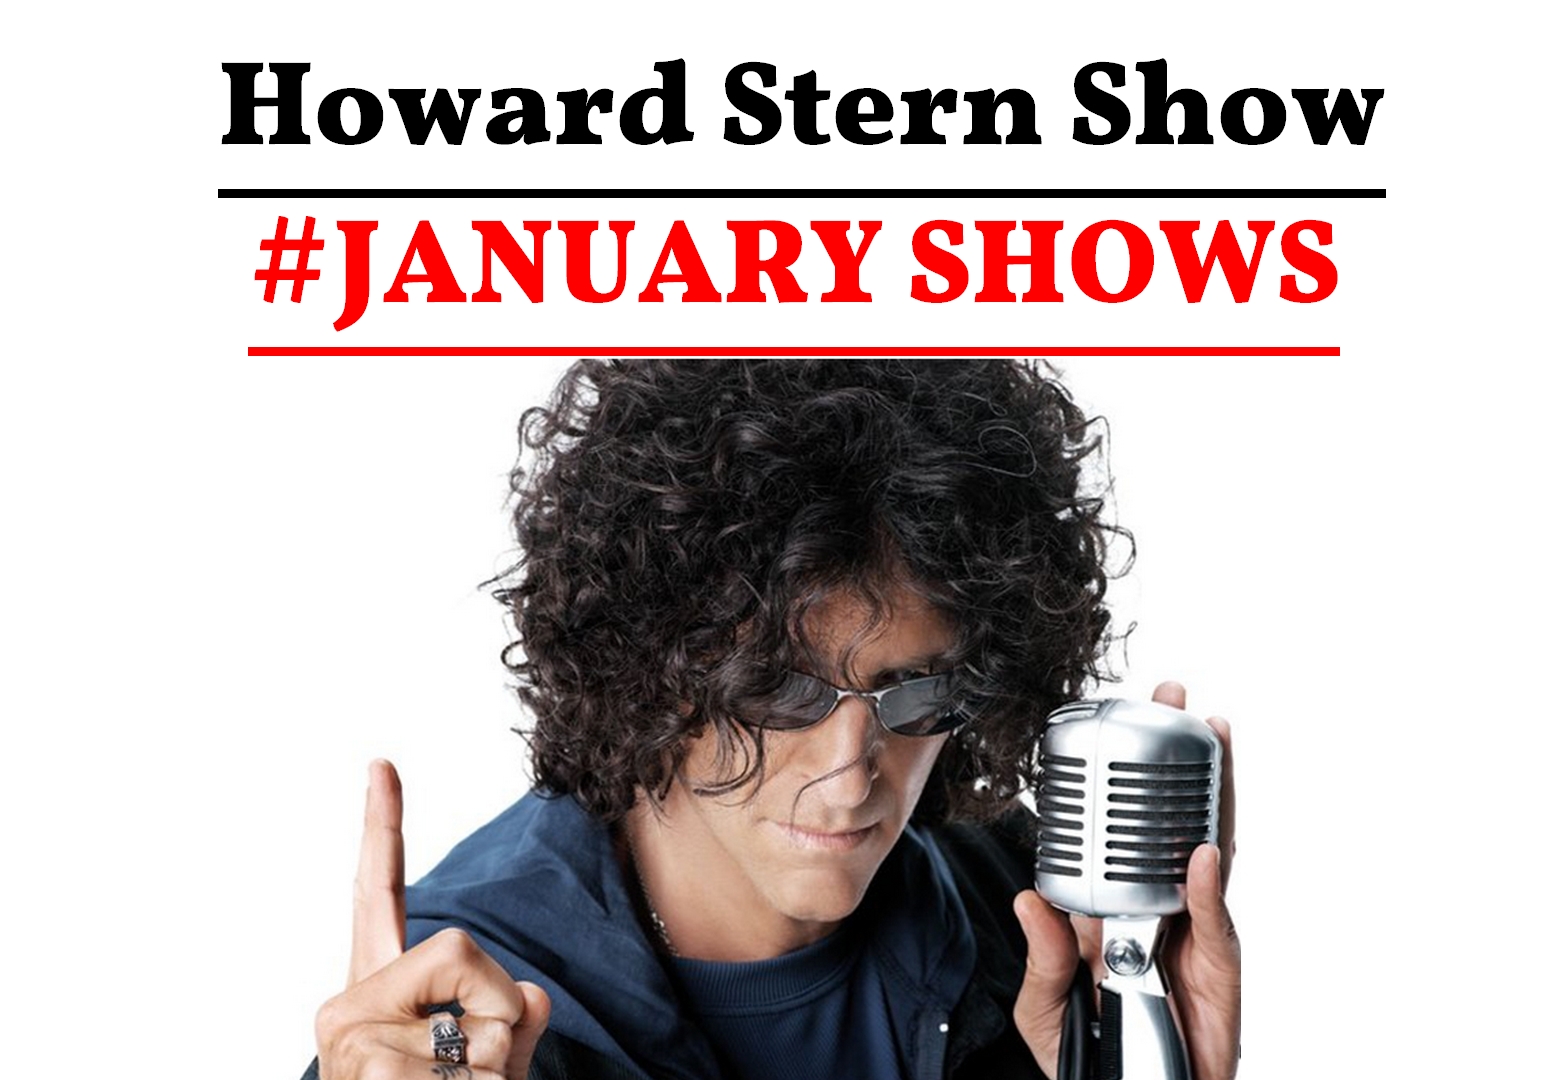 According to the raw feed, illegal downloading of howard stern’s sirius sat...